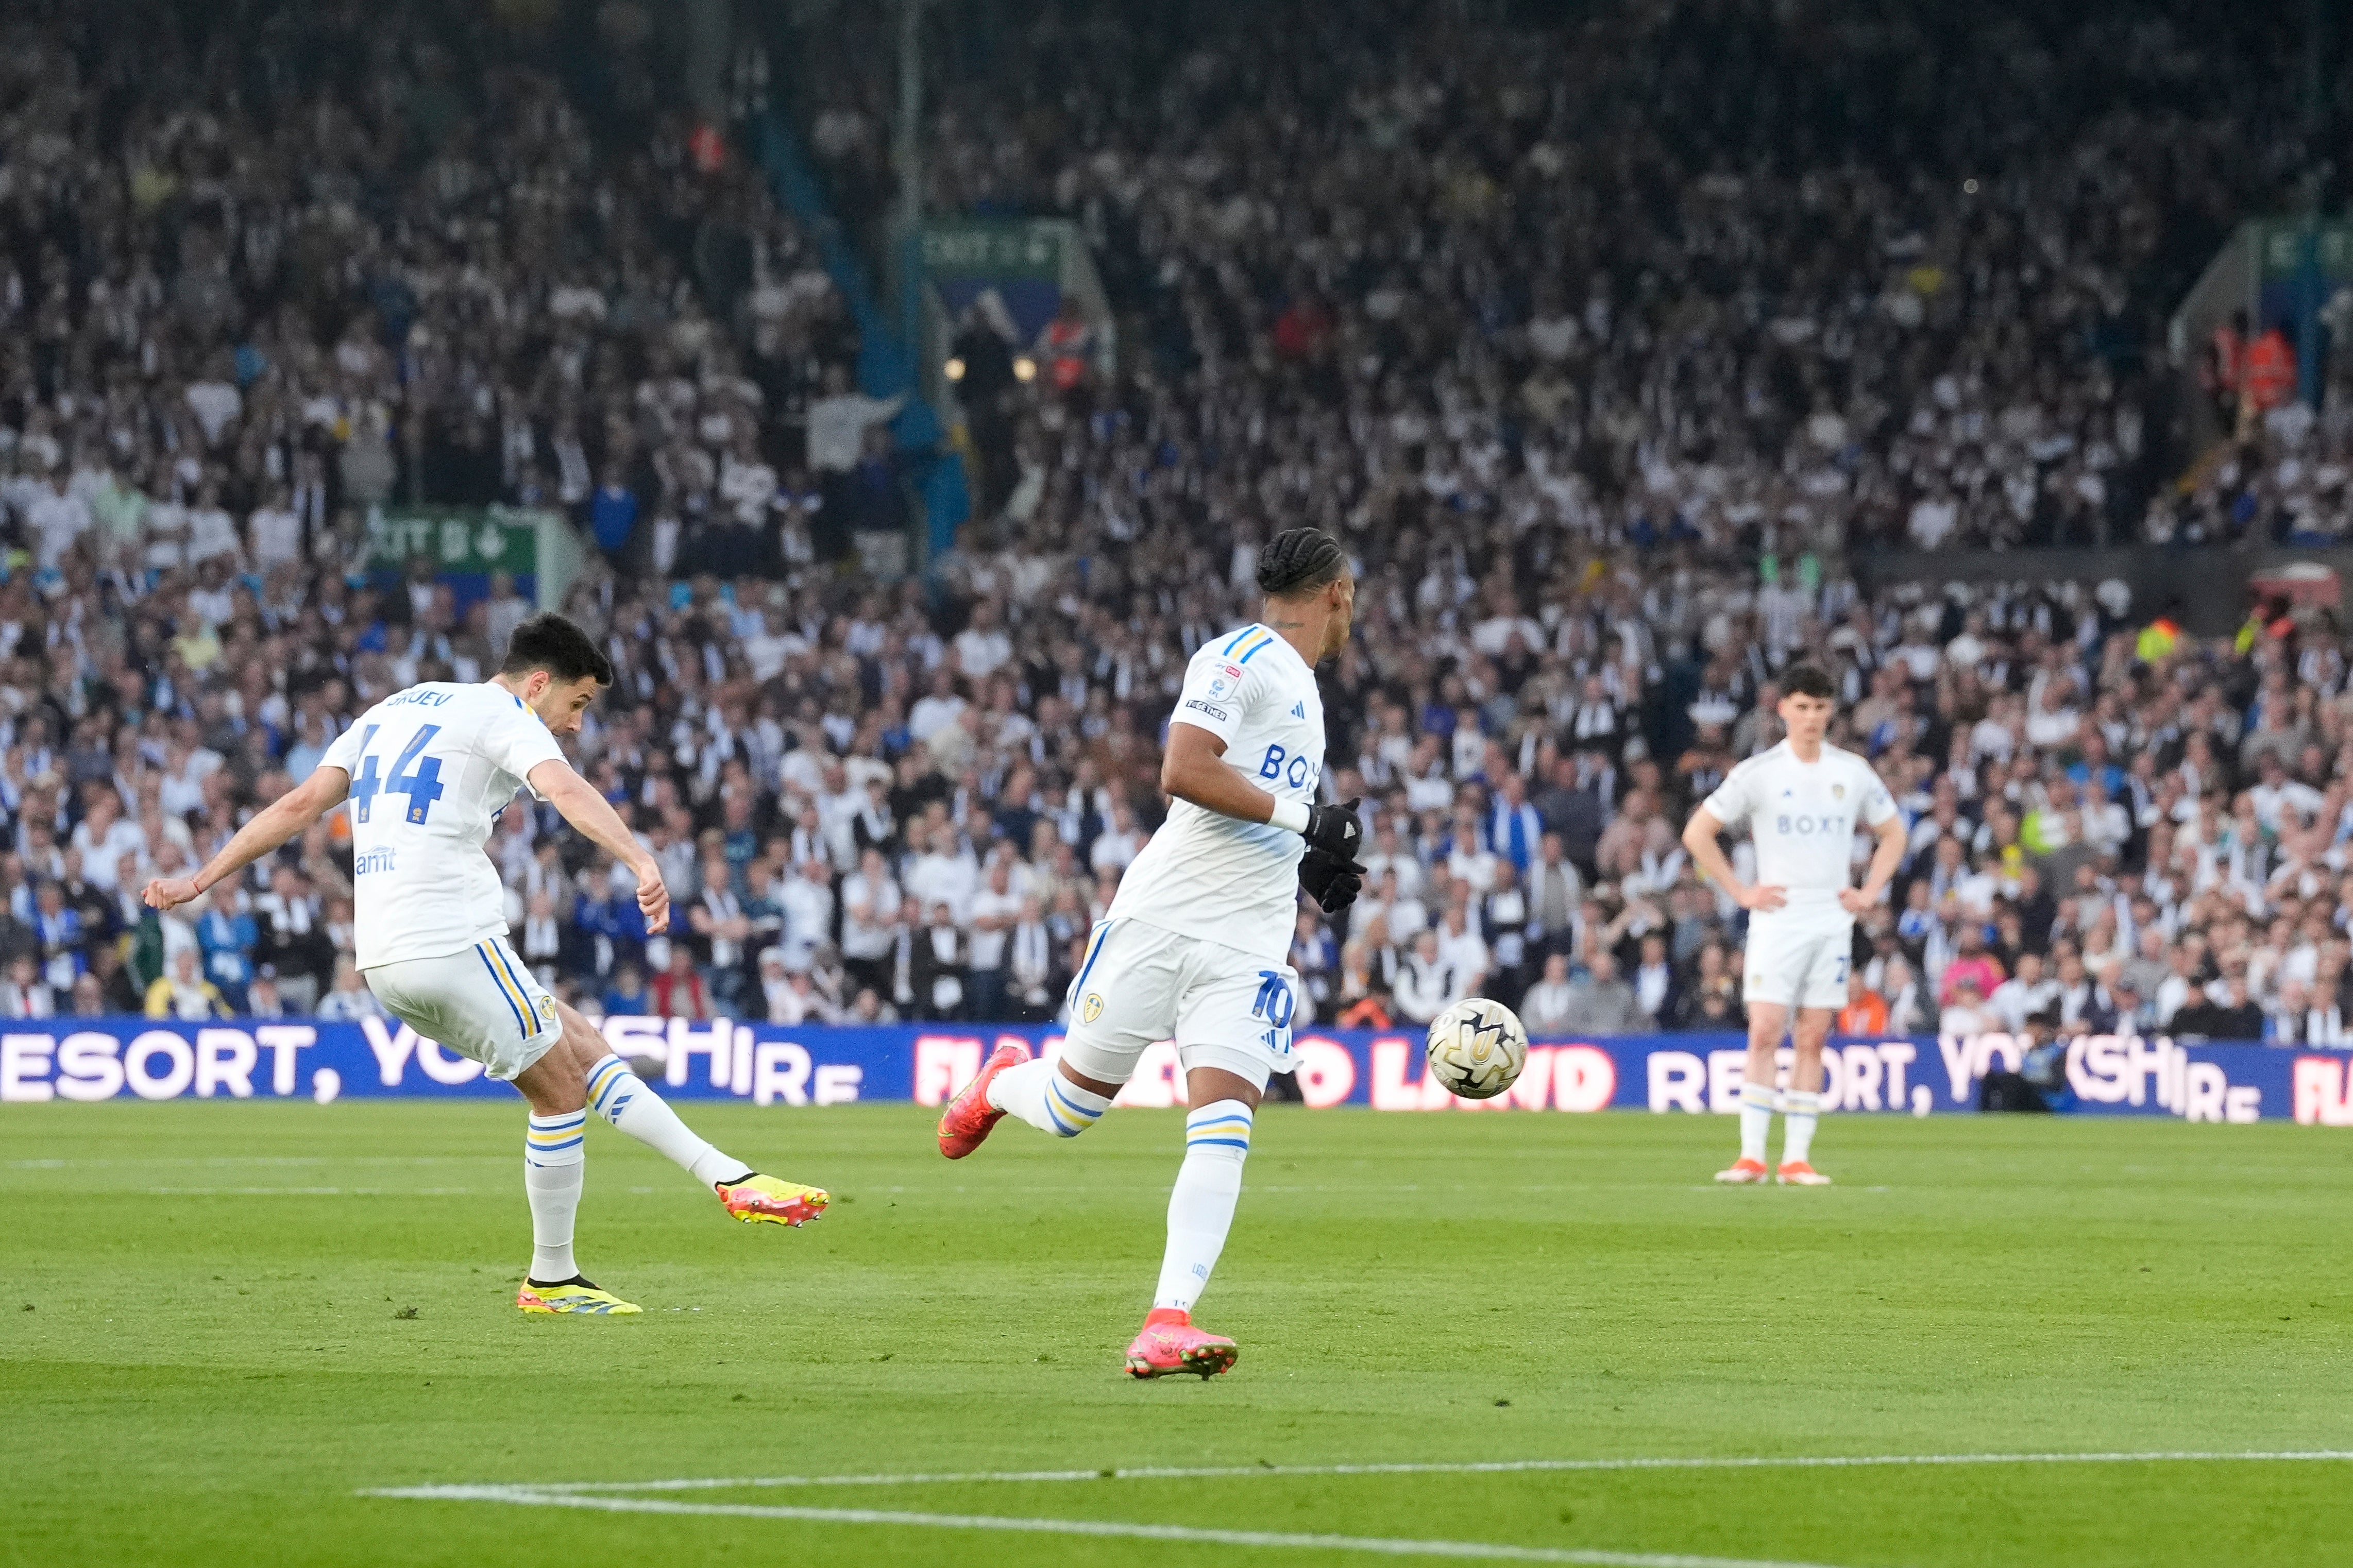 Ilia Gruev’s free kick opened the scoring and gave Leeds confidence to go on and win